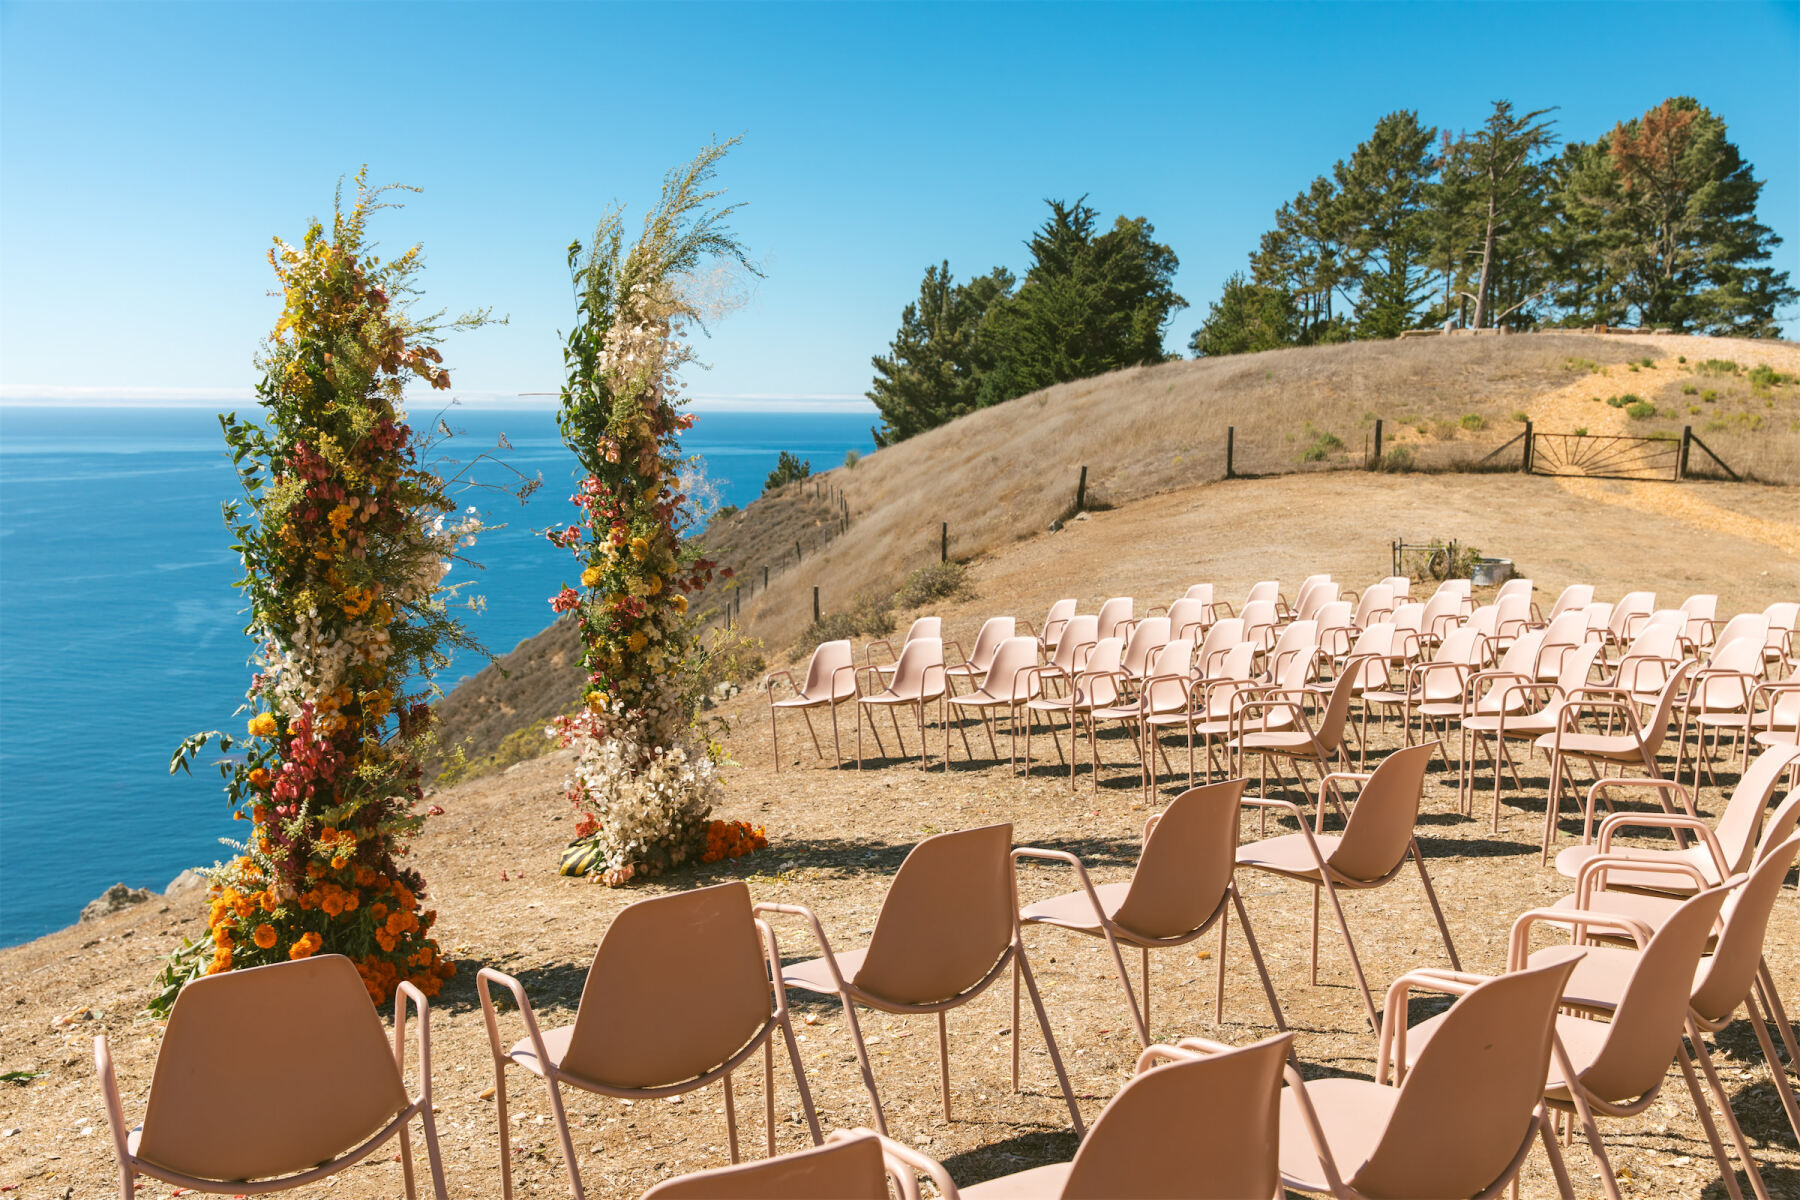 A waterfront Big Sur wedding had the ocean as the backdrop, and modern, blush pink chairs set in a semi-circular arrangement around where the couple would stand.